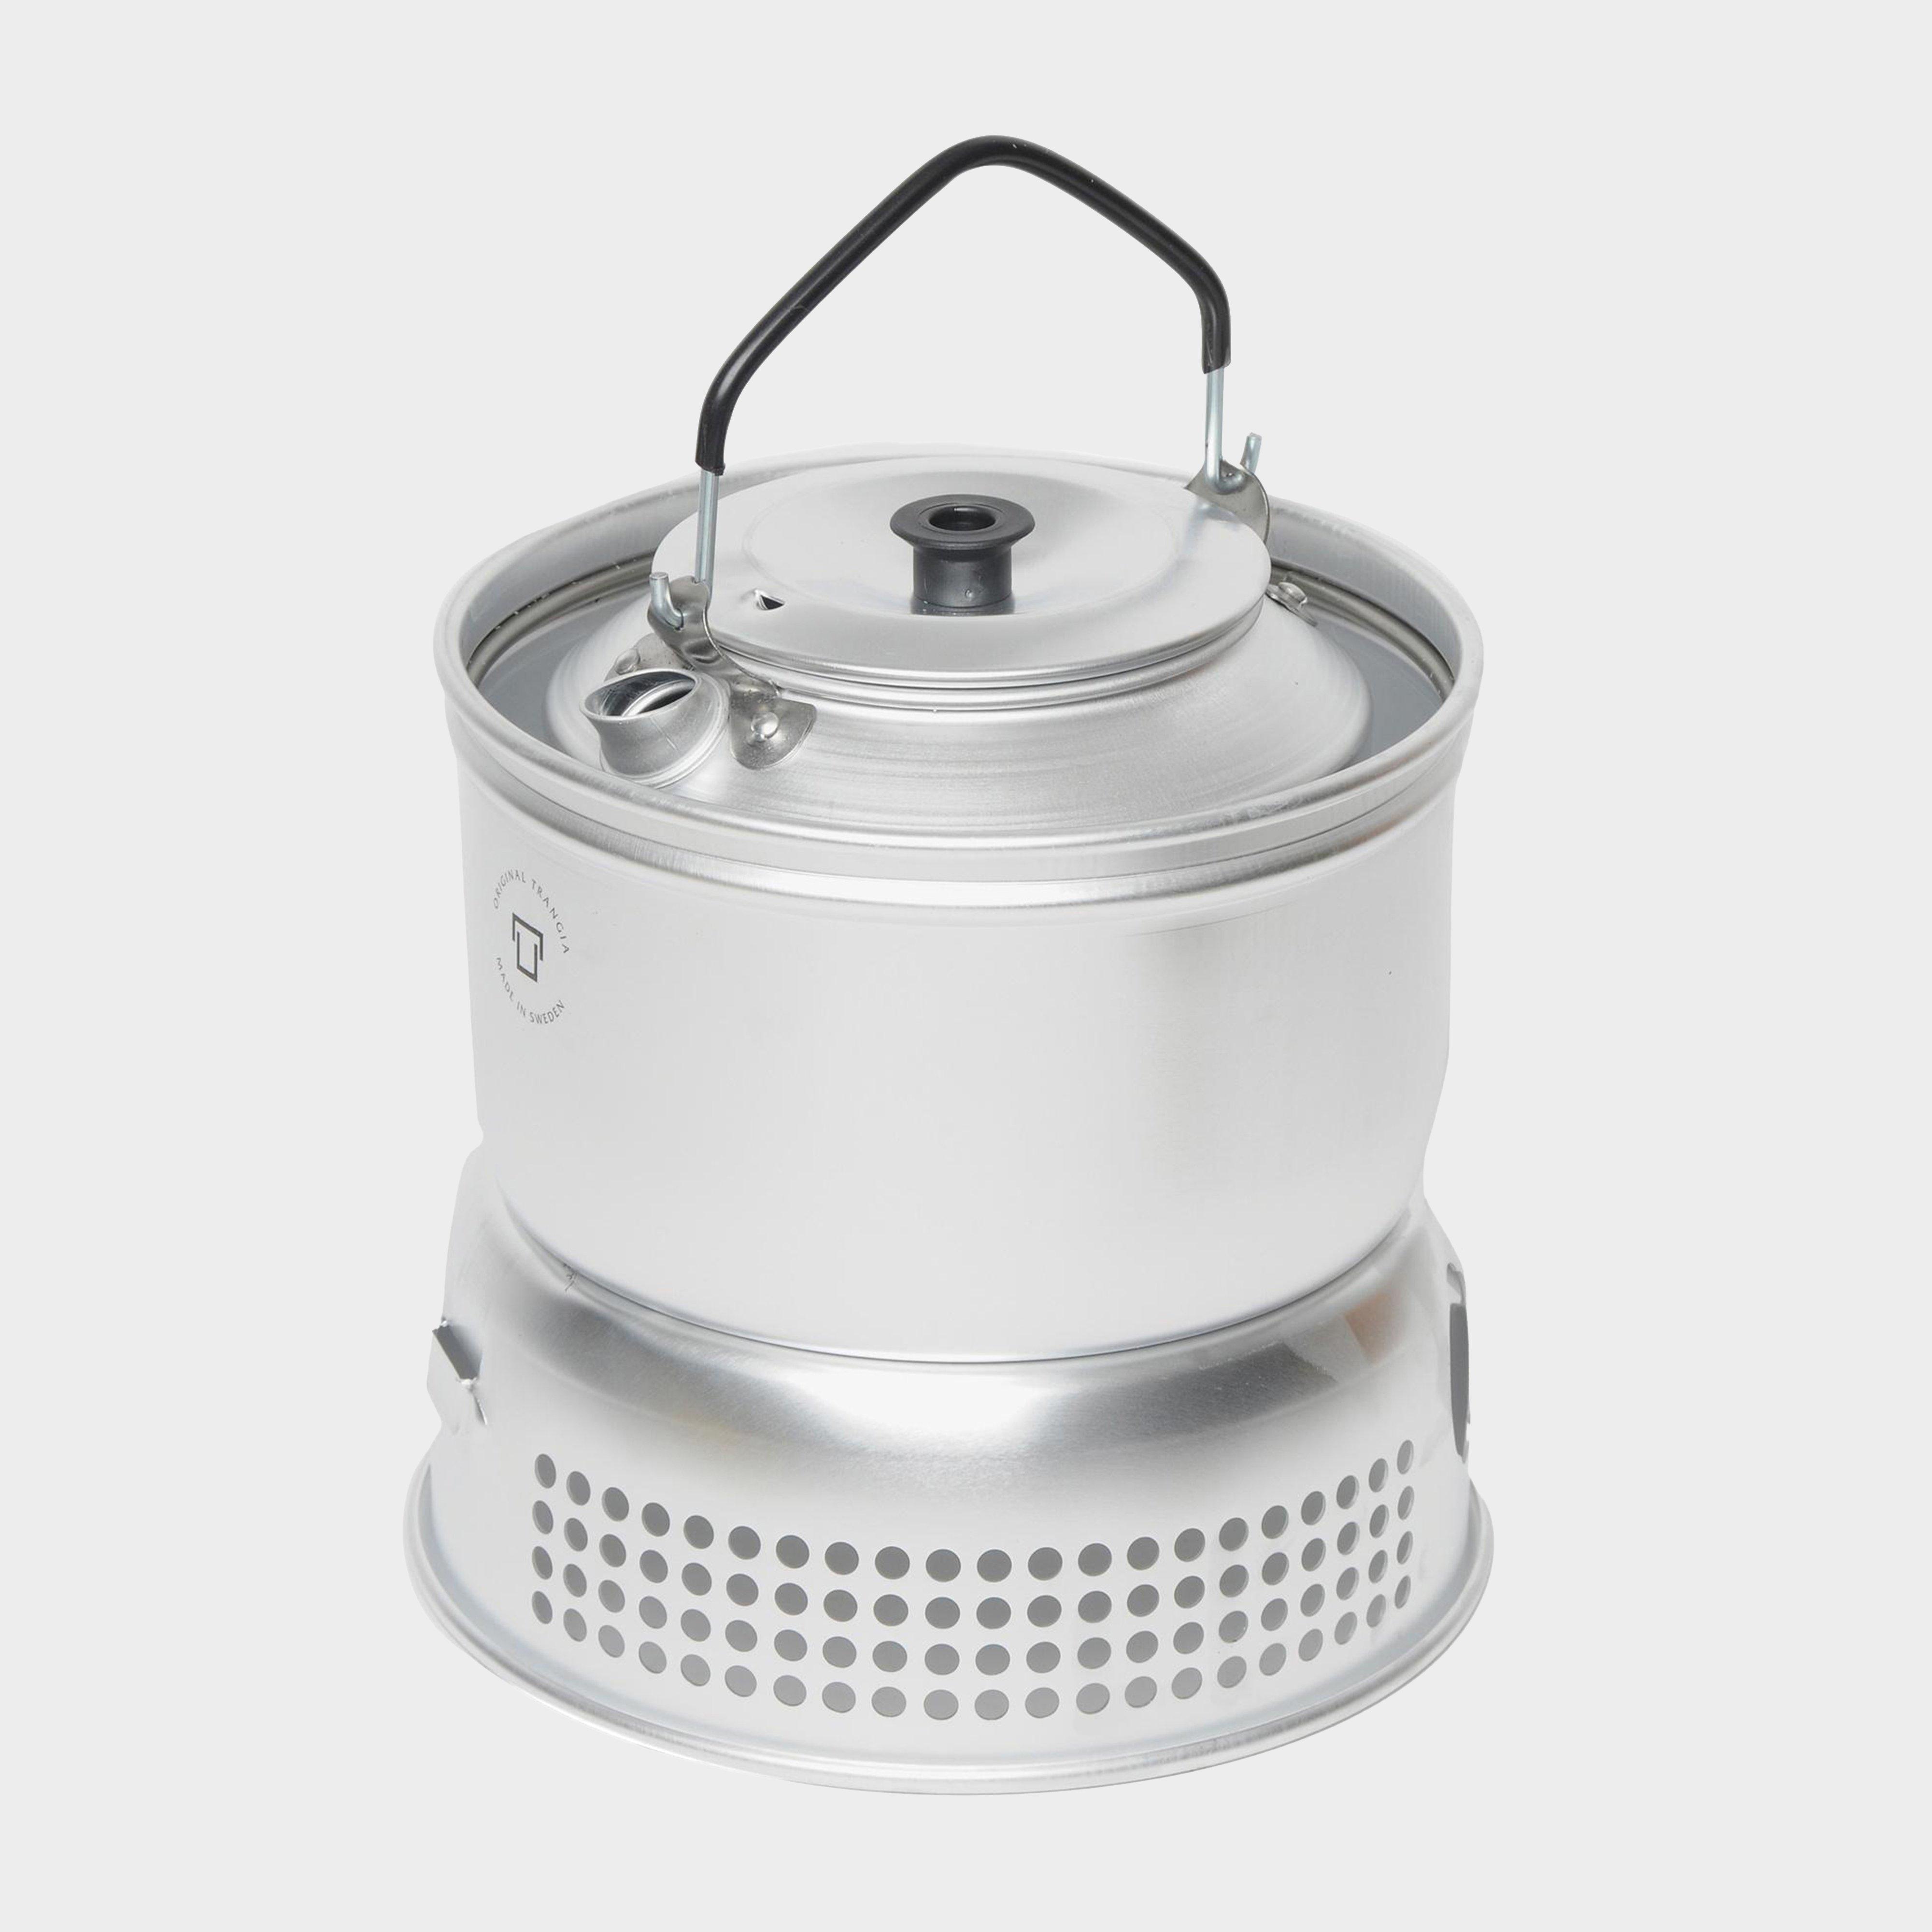 27-6 Spirit Cooking System (1-2 Person) -